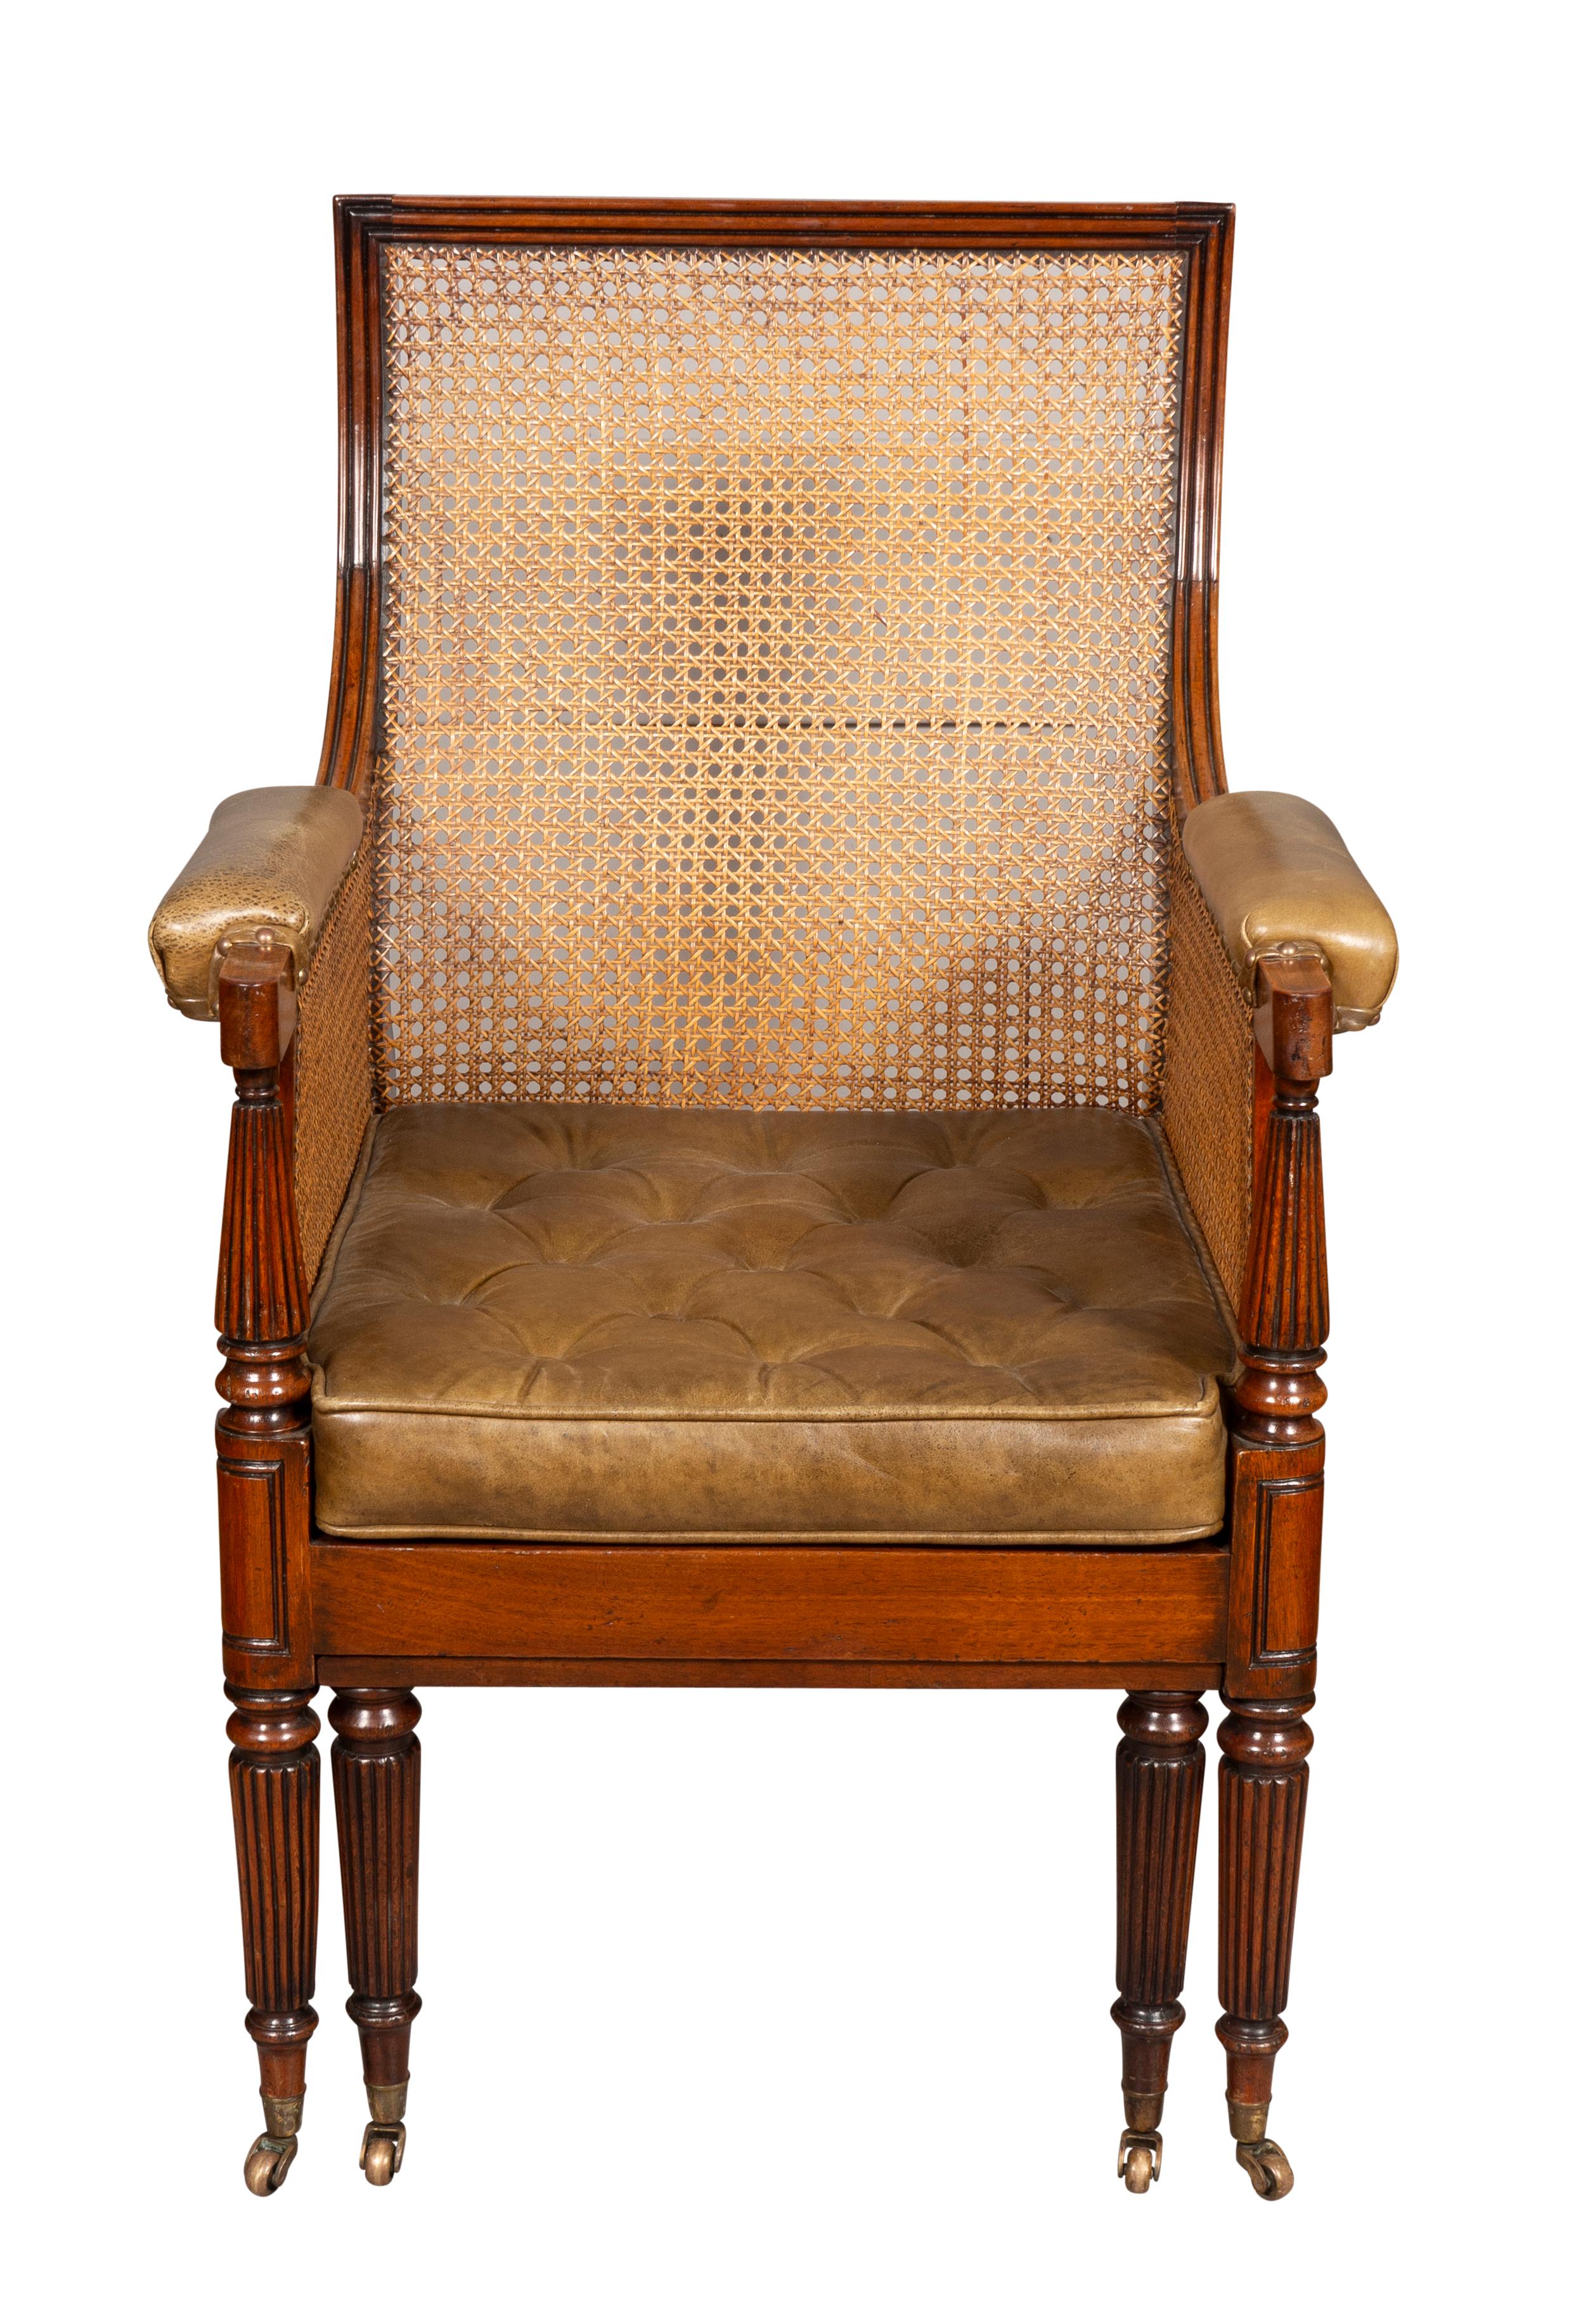 With straight molded crestrail over a caned back and sides, the arms with leather arm pads, tufted green leather seat cushion over a caned seat. Pull out foot rest. Raised on circular tapered reeded legs with brass cup casters.